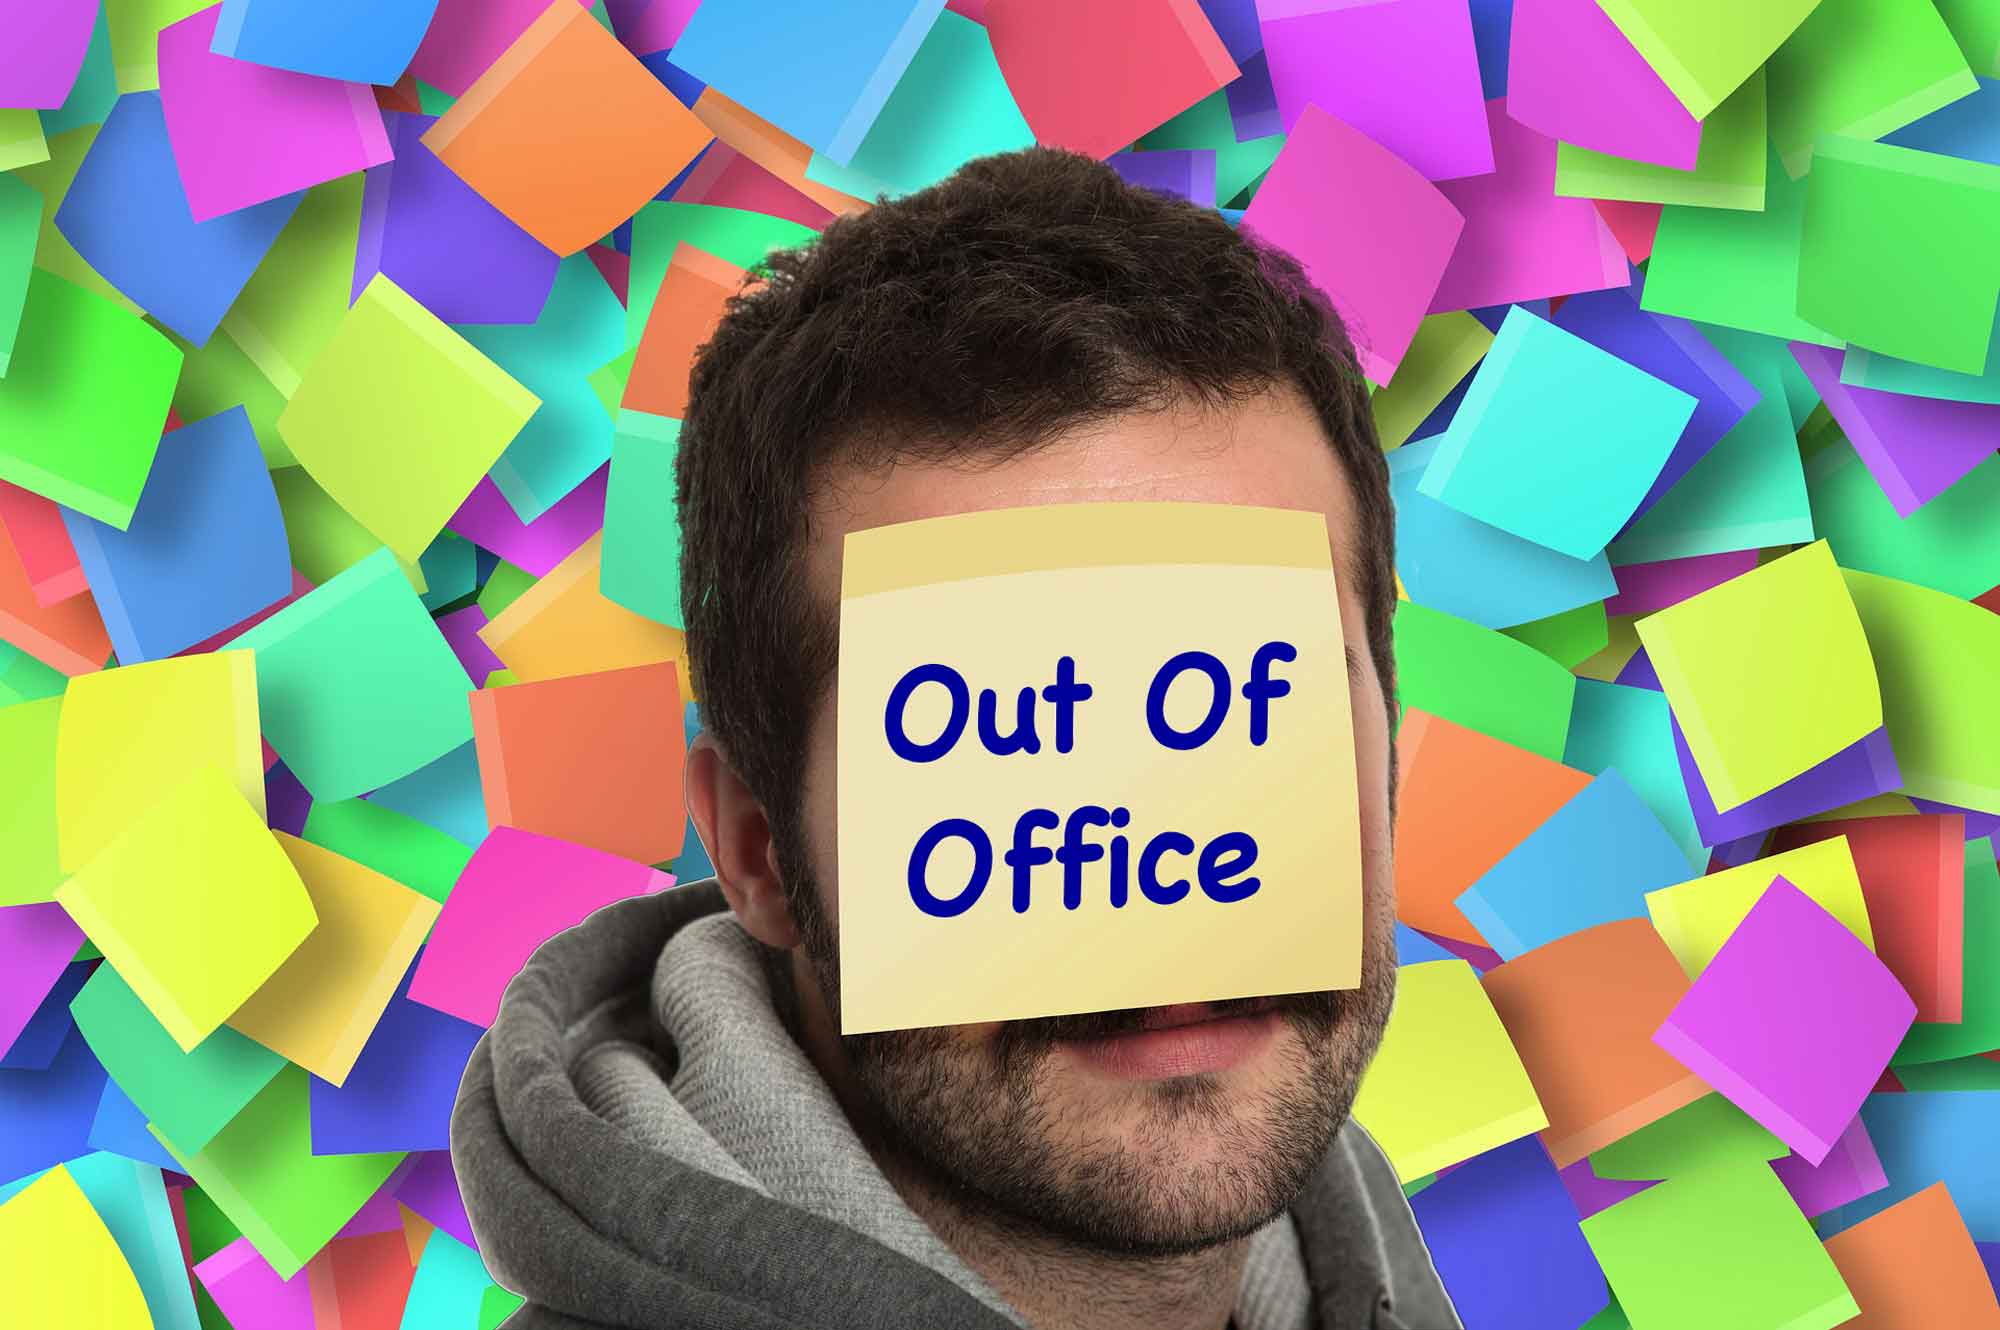 75 Funny Out Of Office Messages That Will Make Your Coworkers Smile